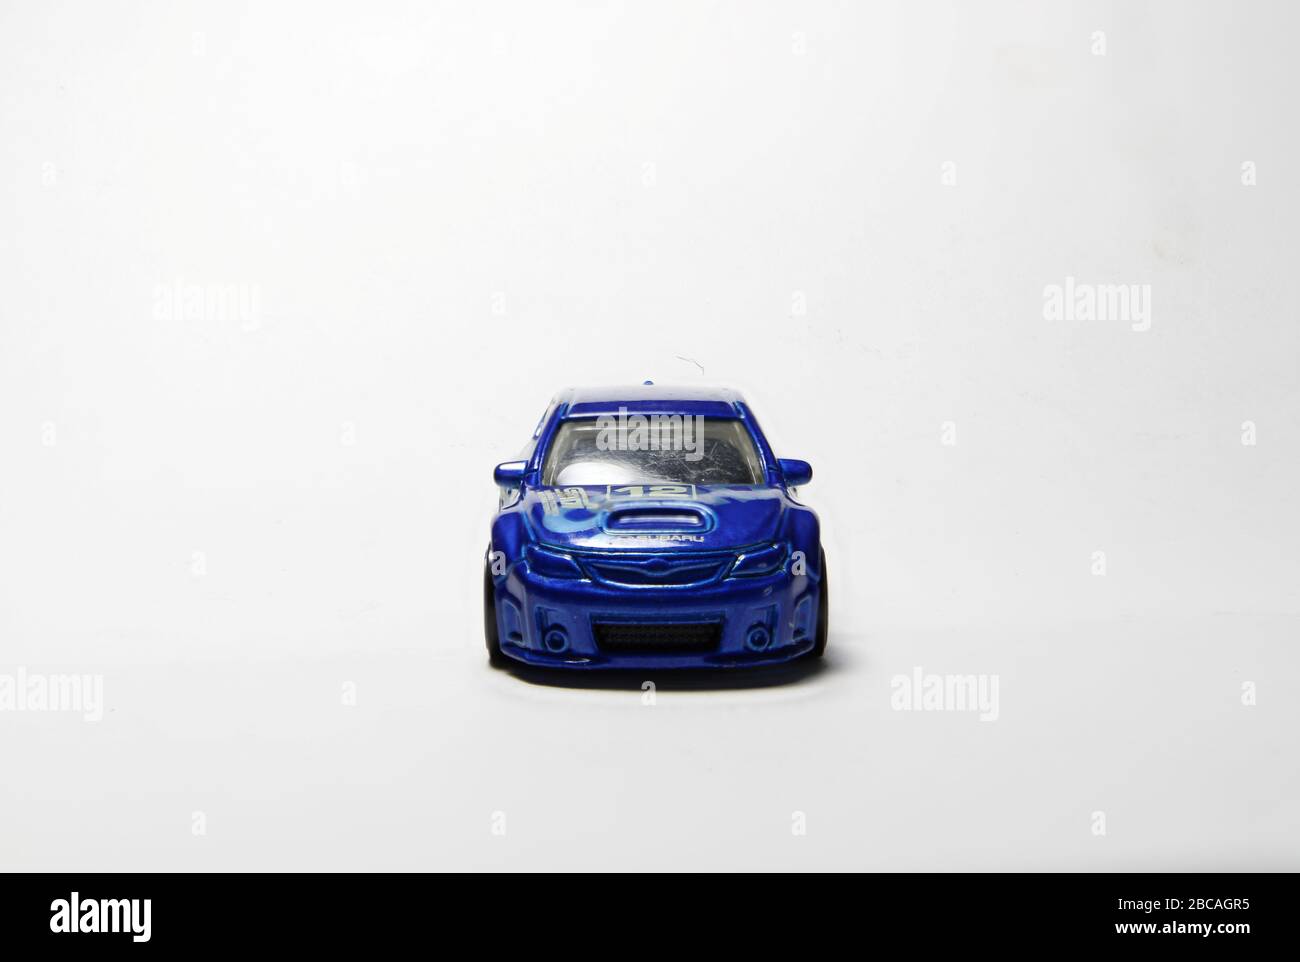 Subaru Rally car in rally blue. STI trim model rally spec wagon number 12. White wheels and traditional Subaru hood scoop. From four different angles. Stock Photo